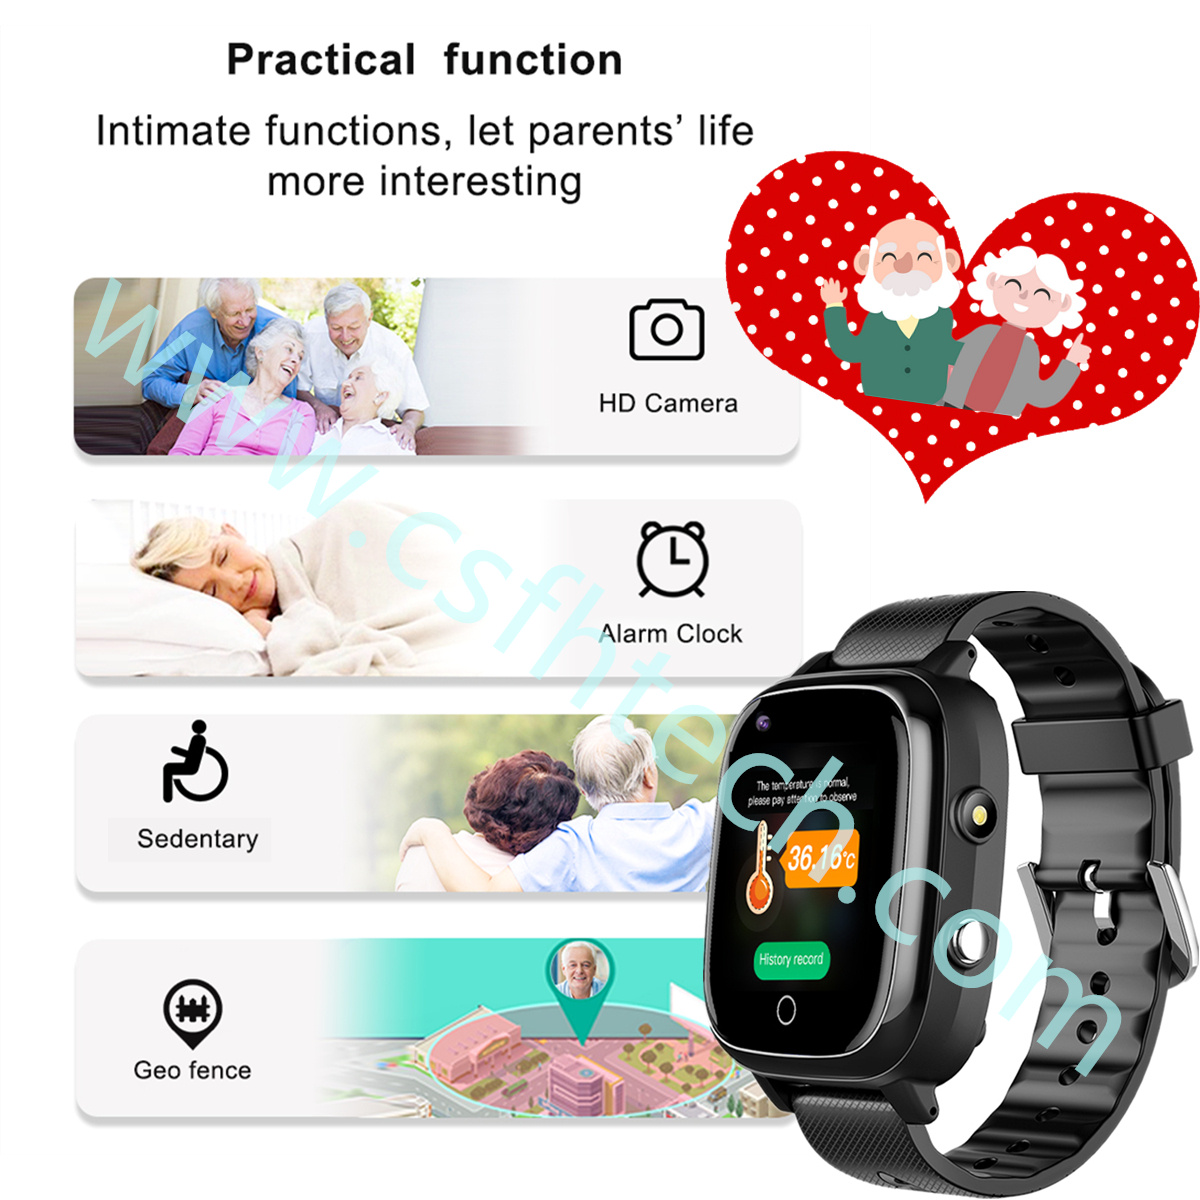 Csfhtech   4G Elderly Smart Watch Heart Rate GPS WIFI Positioning Track Watch Voice Chat SOS Video Call Alarm Clock For Adult Man (10).jpg